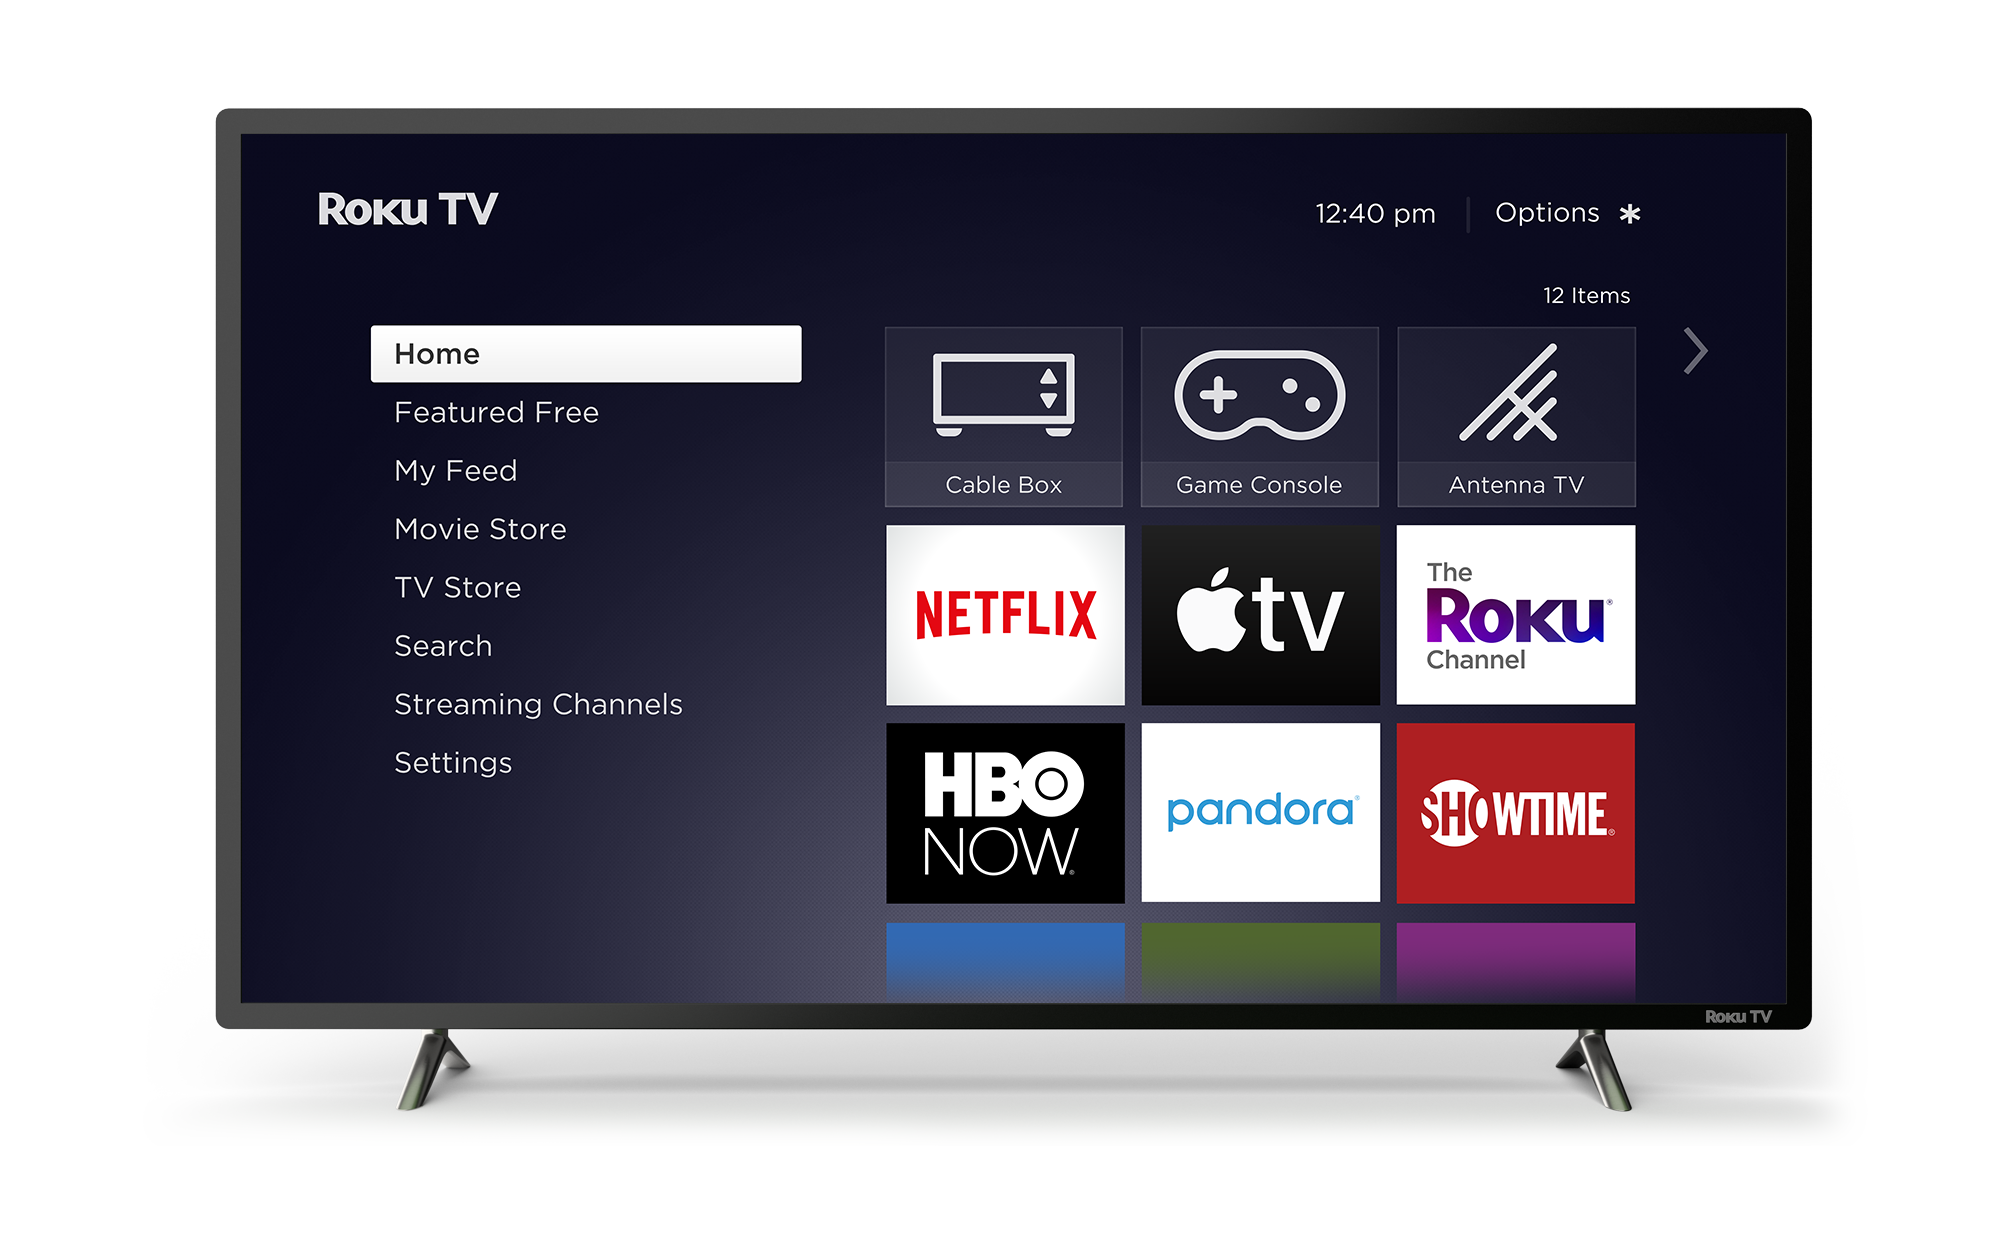 Where Is The IP Address On Roku TV?